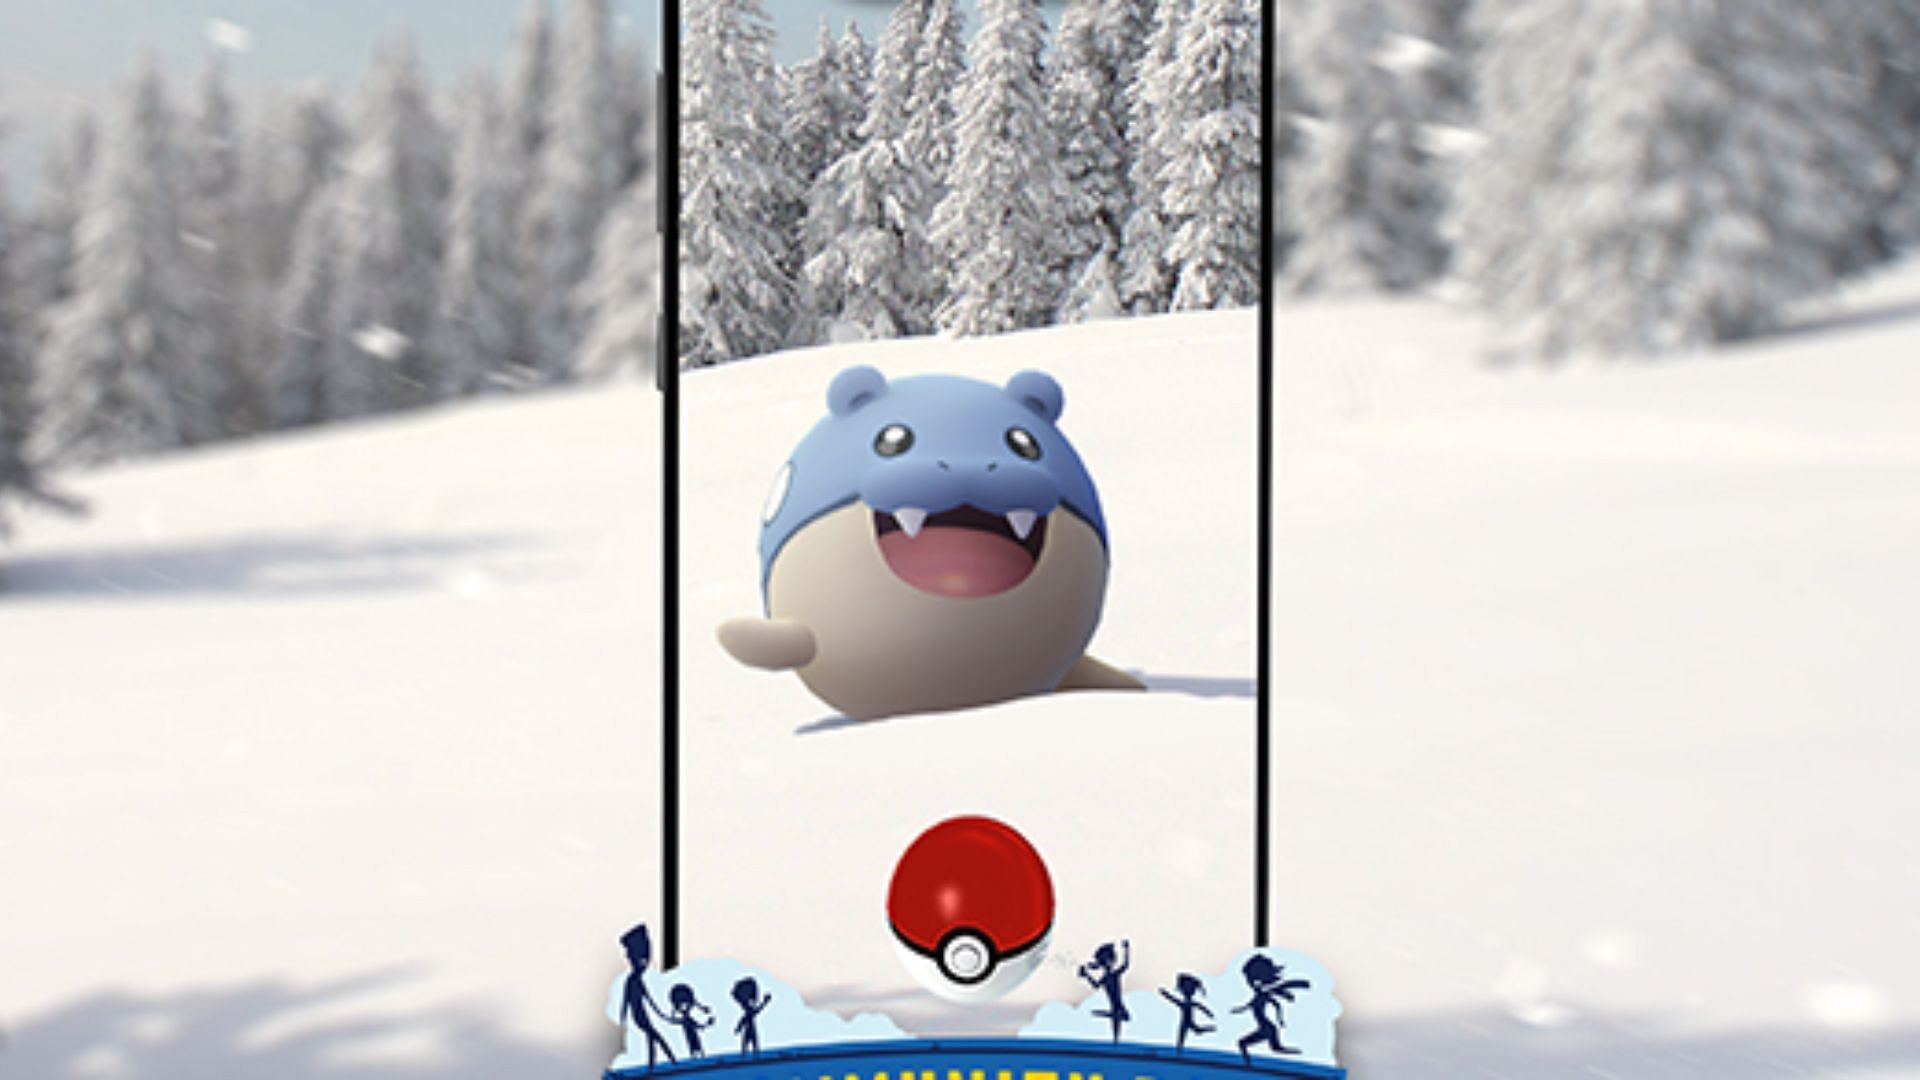 Spheal will be featured in January's Community Day (Image via Niantic)